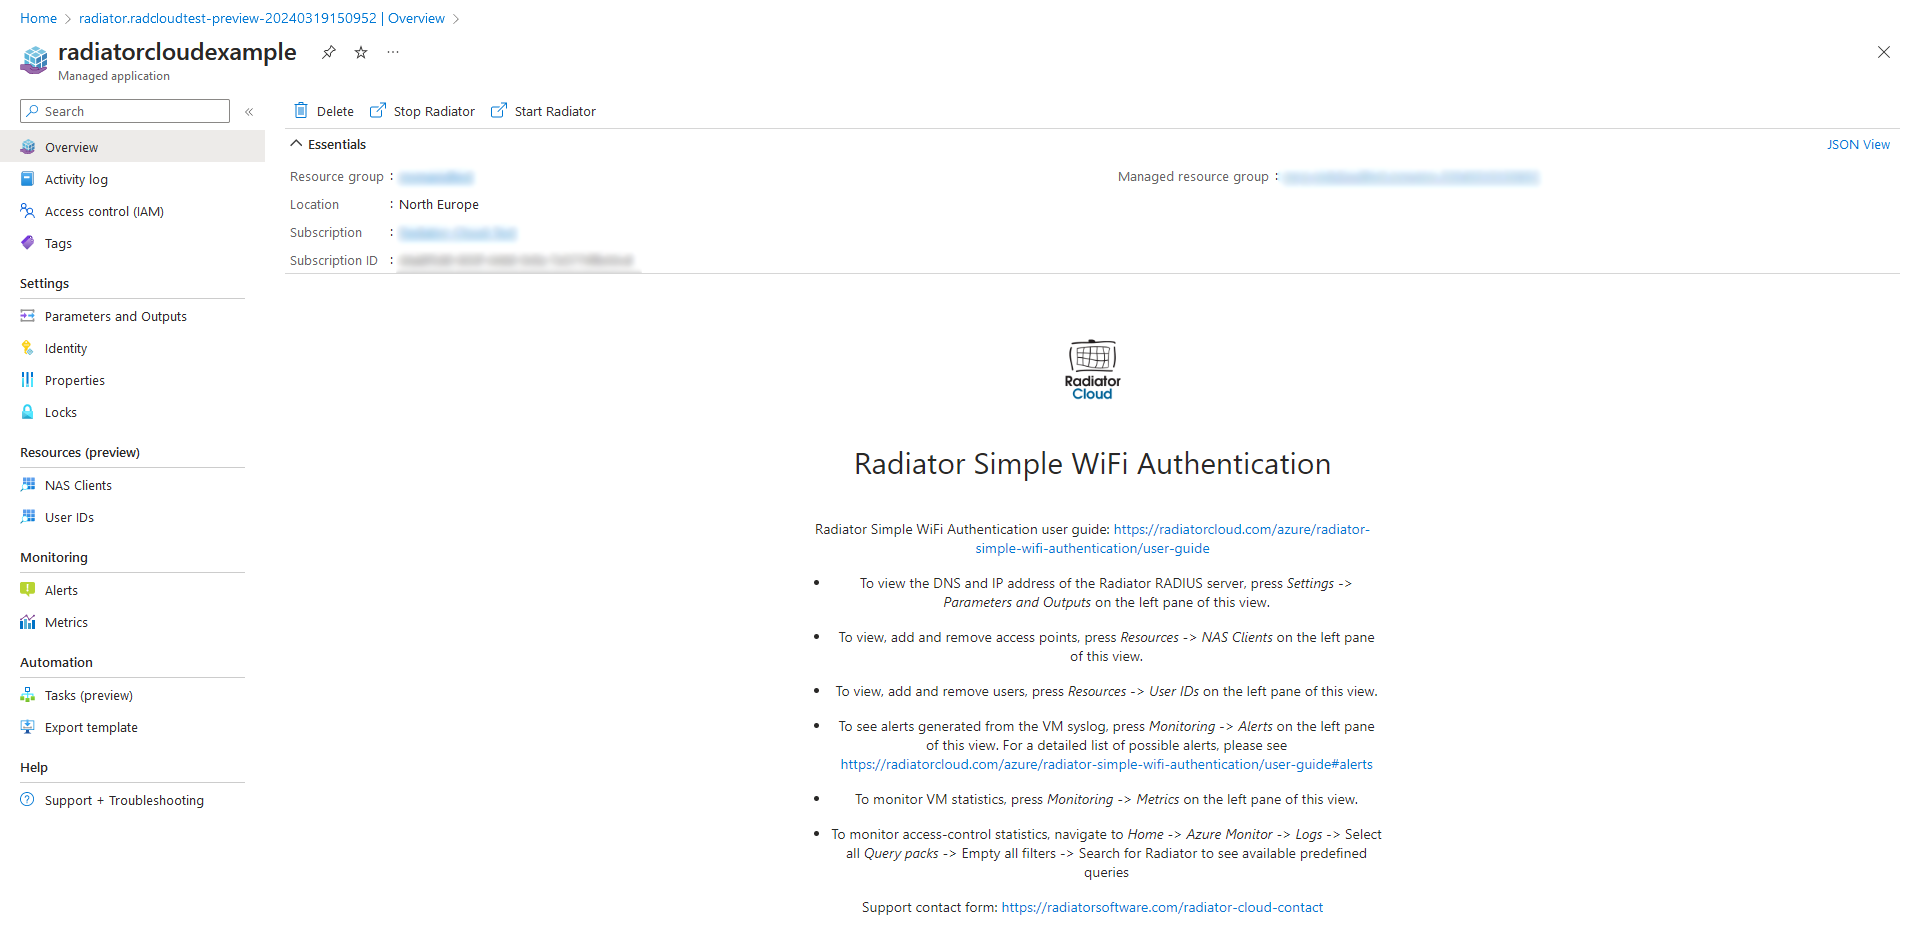 First view of Radiator Cloud Simple WiFi authentication application